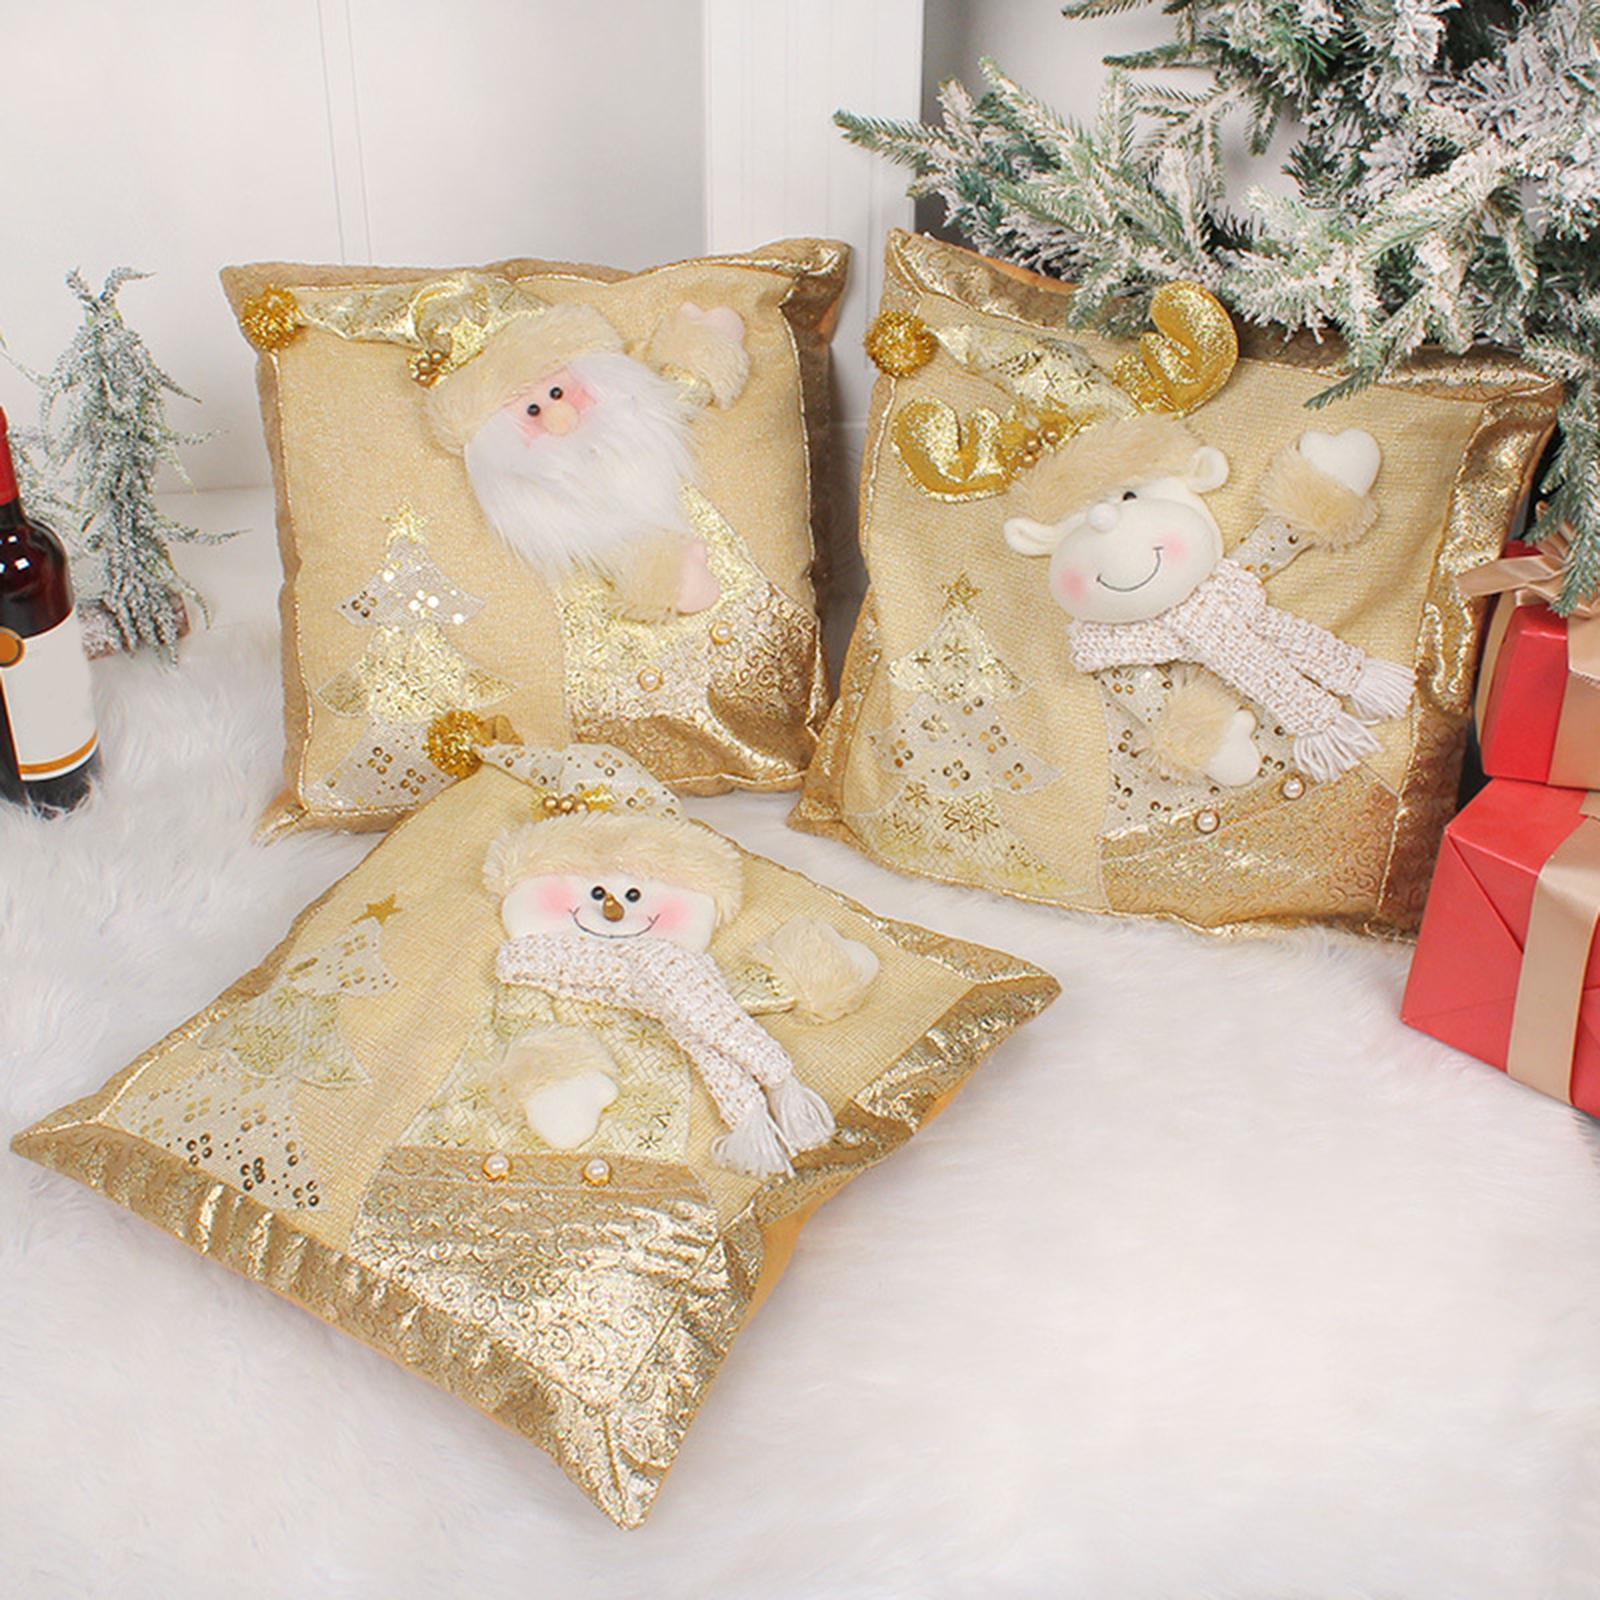 Square Christmas Snowman Throw Pillow Santa Claus for Decoration Sofa Couch